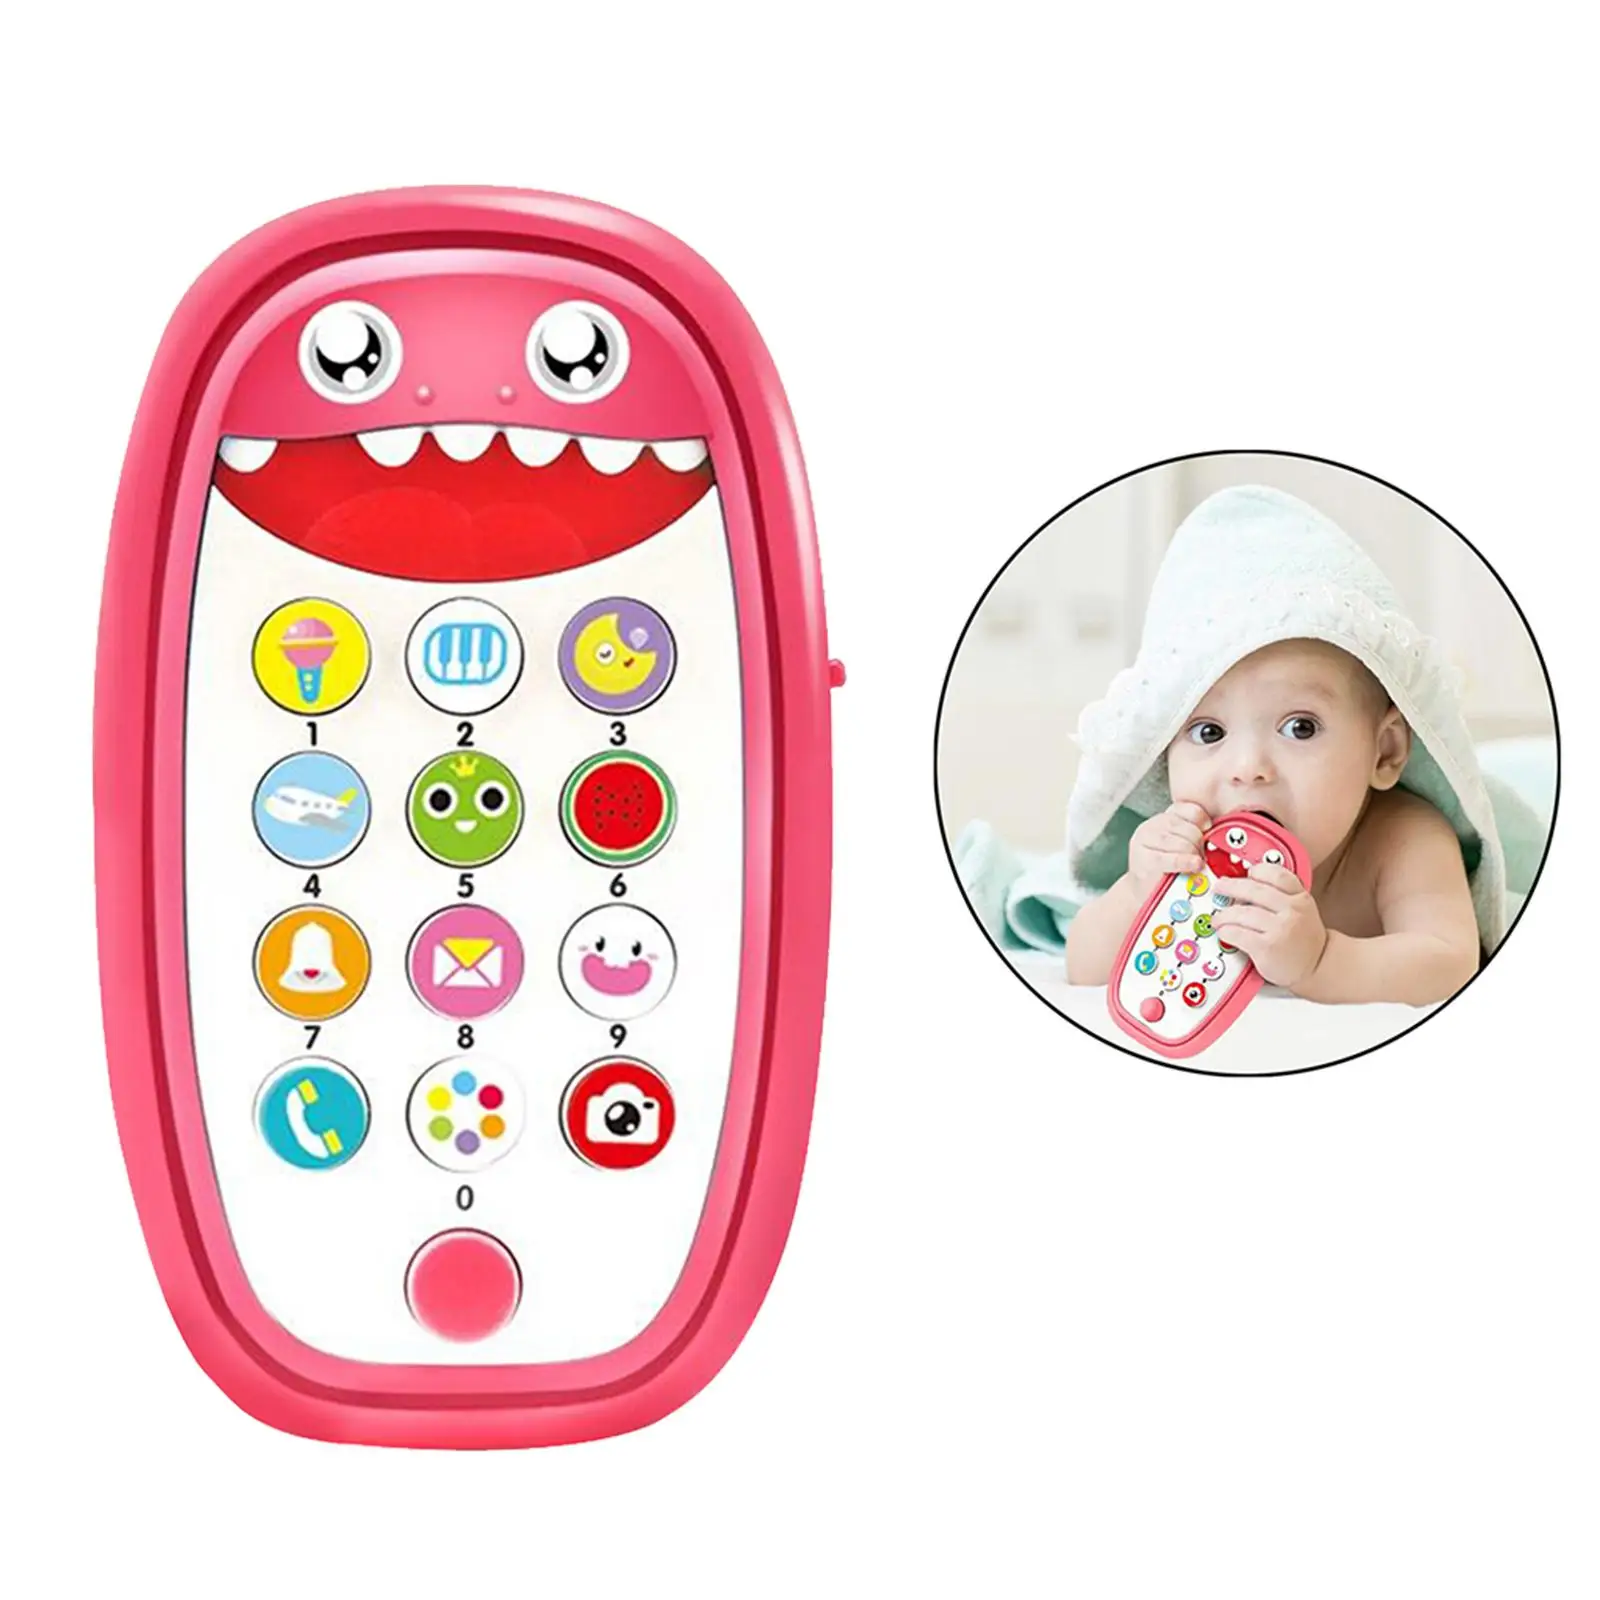 Teething Phone Toy for Babies with Removable Soft Case, Lights, Music And